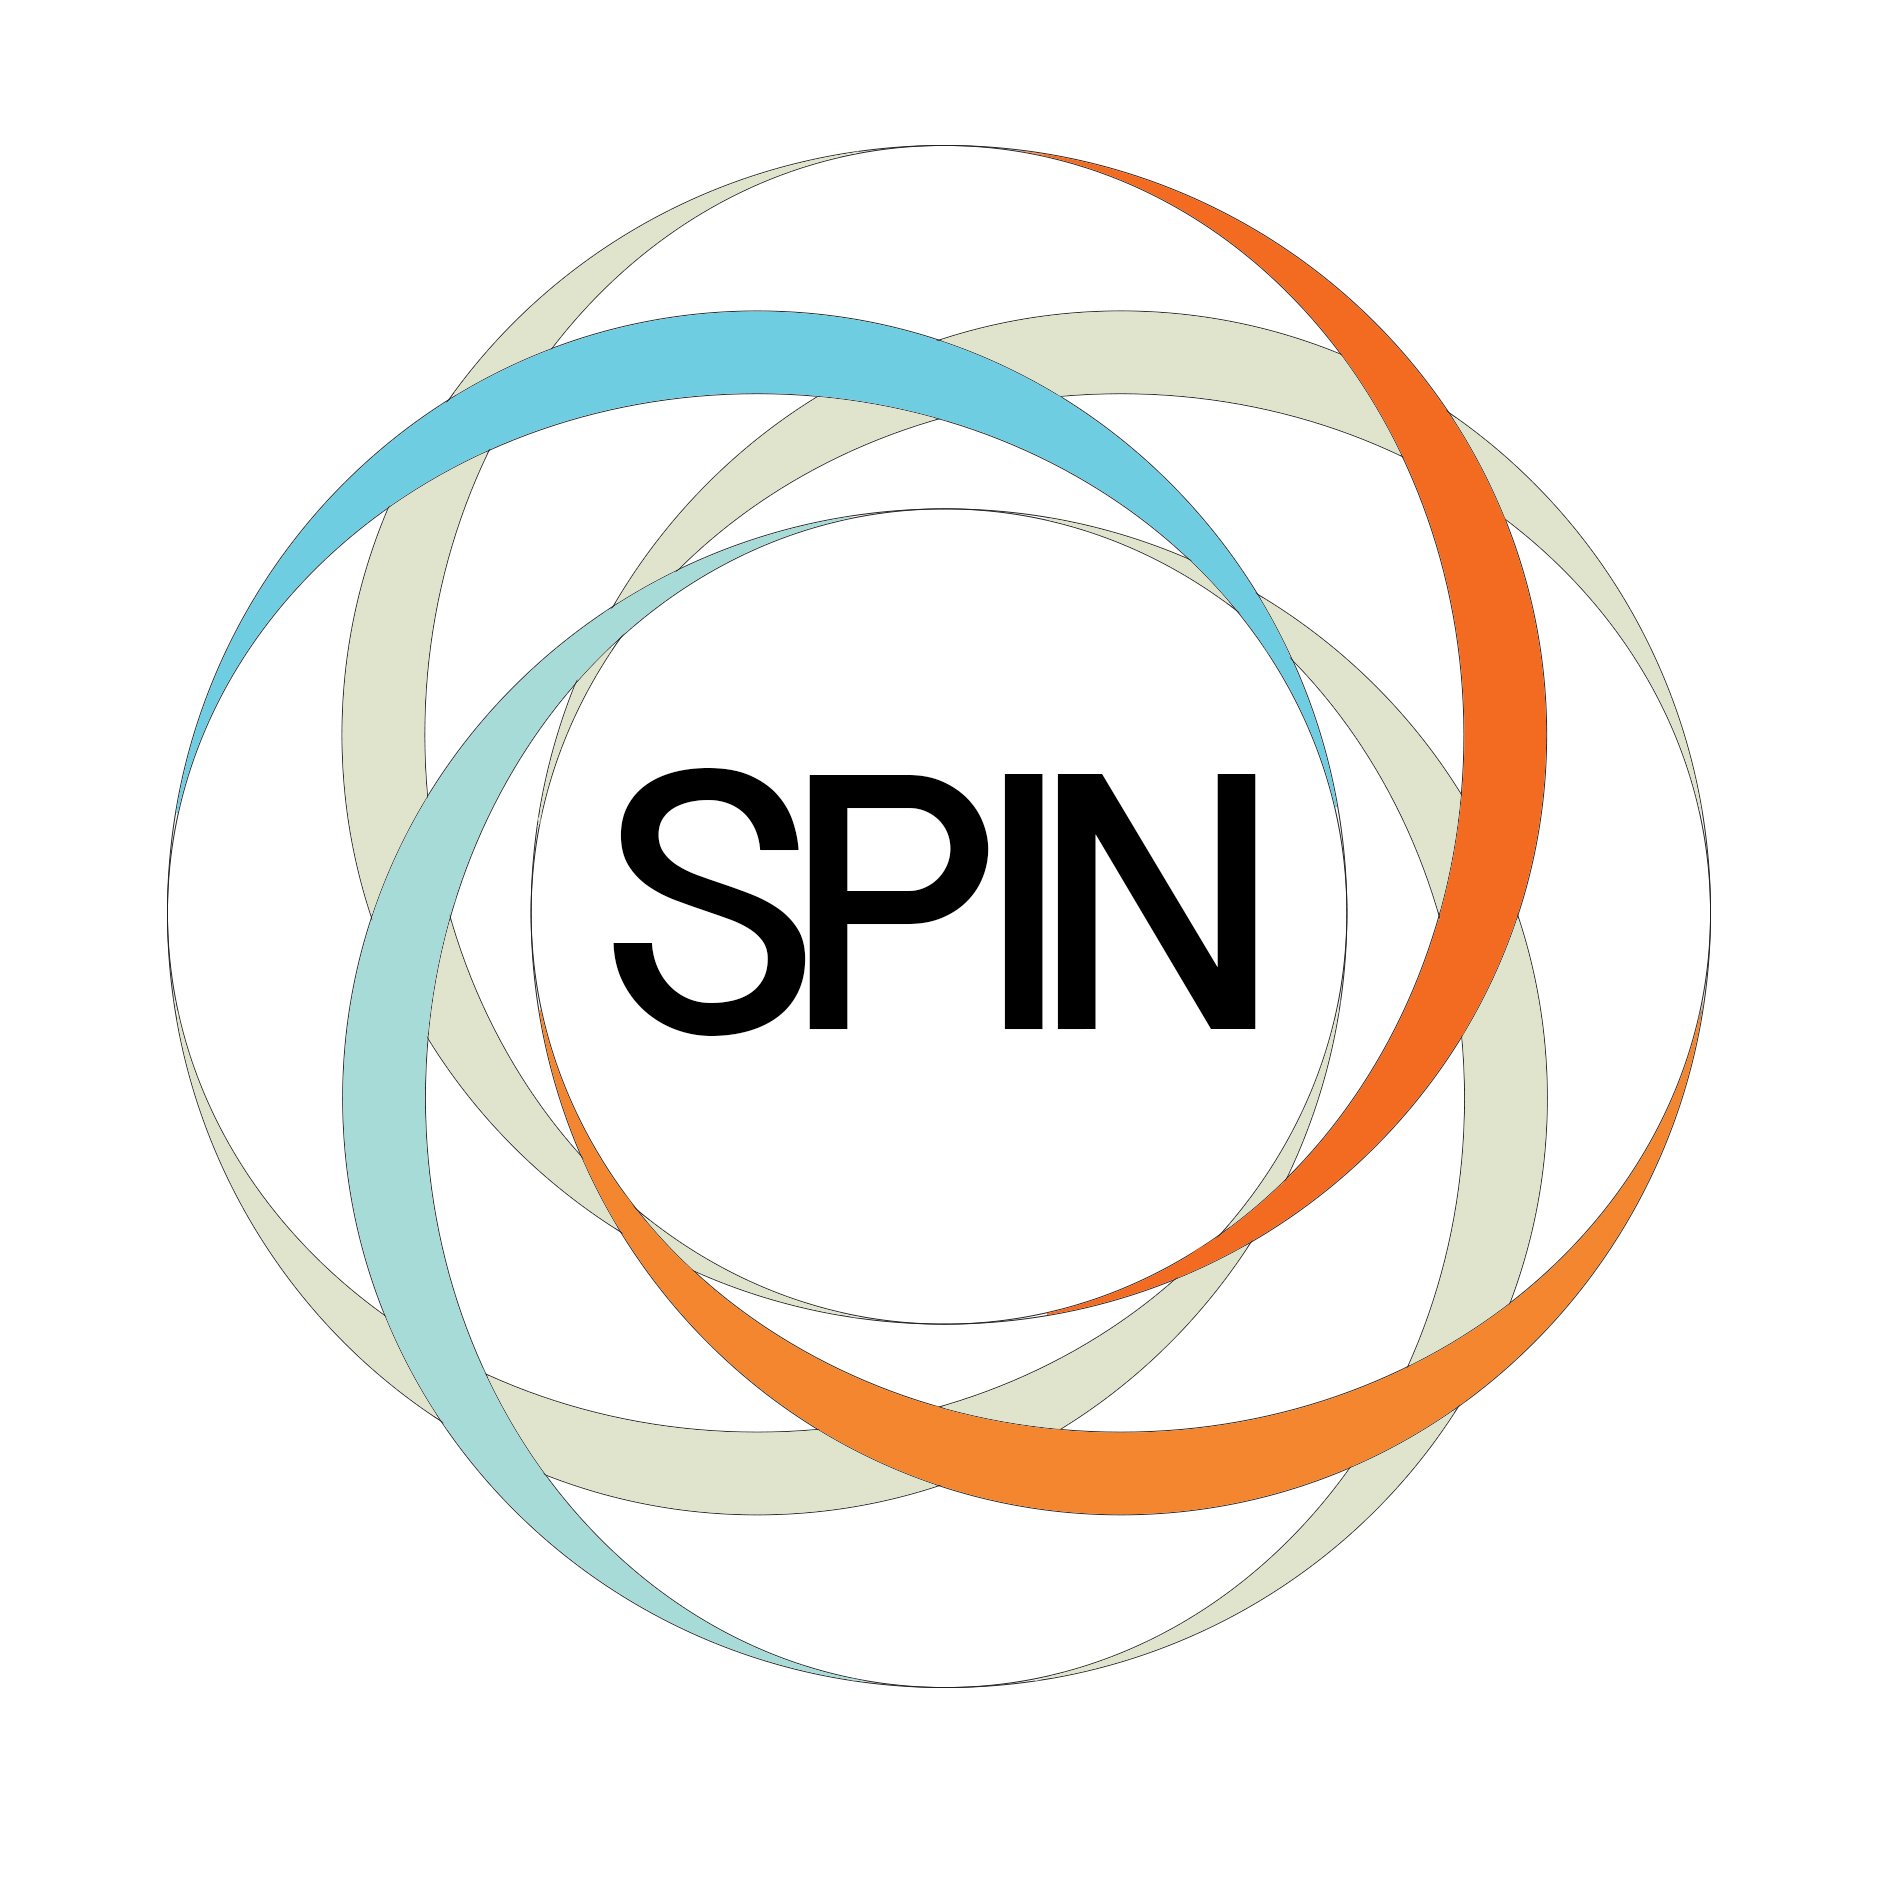 The Scleroderma Patient-centered Intervention Network (SPIN): patients, researchers, & healthcare providers, working to develop support programs for scleroderma